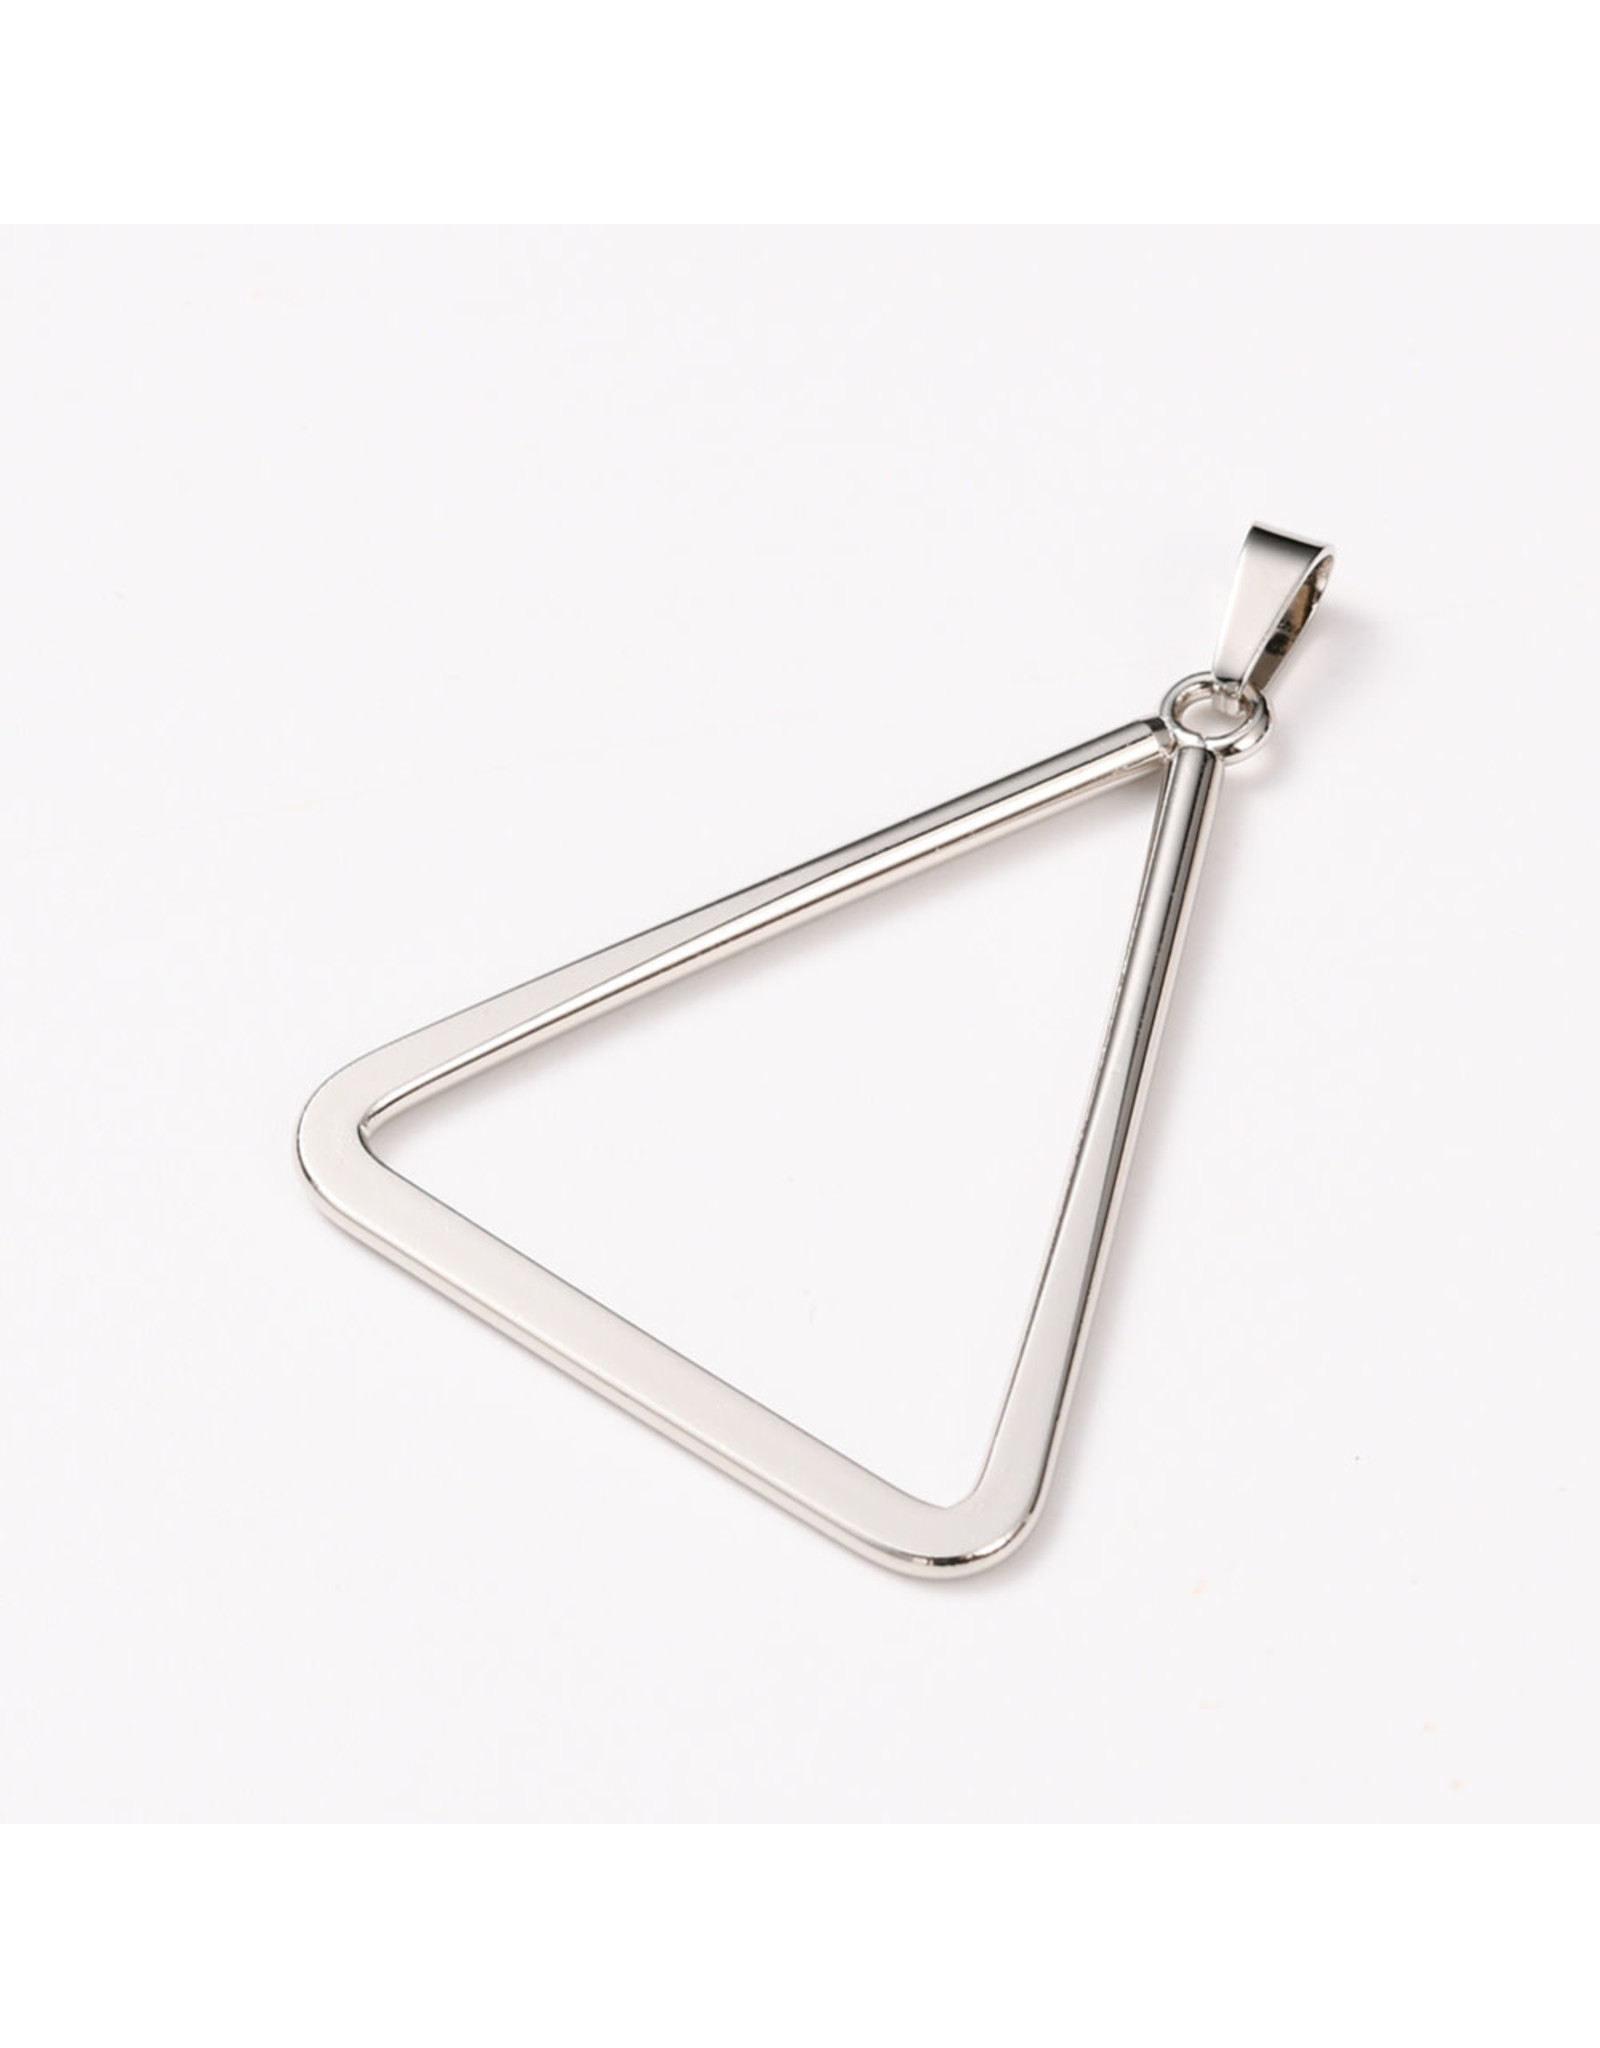 Triangle Earrings and Pendant  38x29mm Stainless Steel    x1 Set